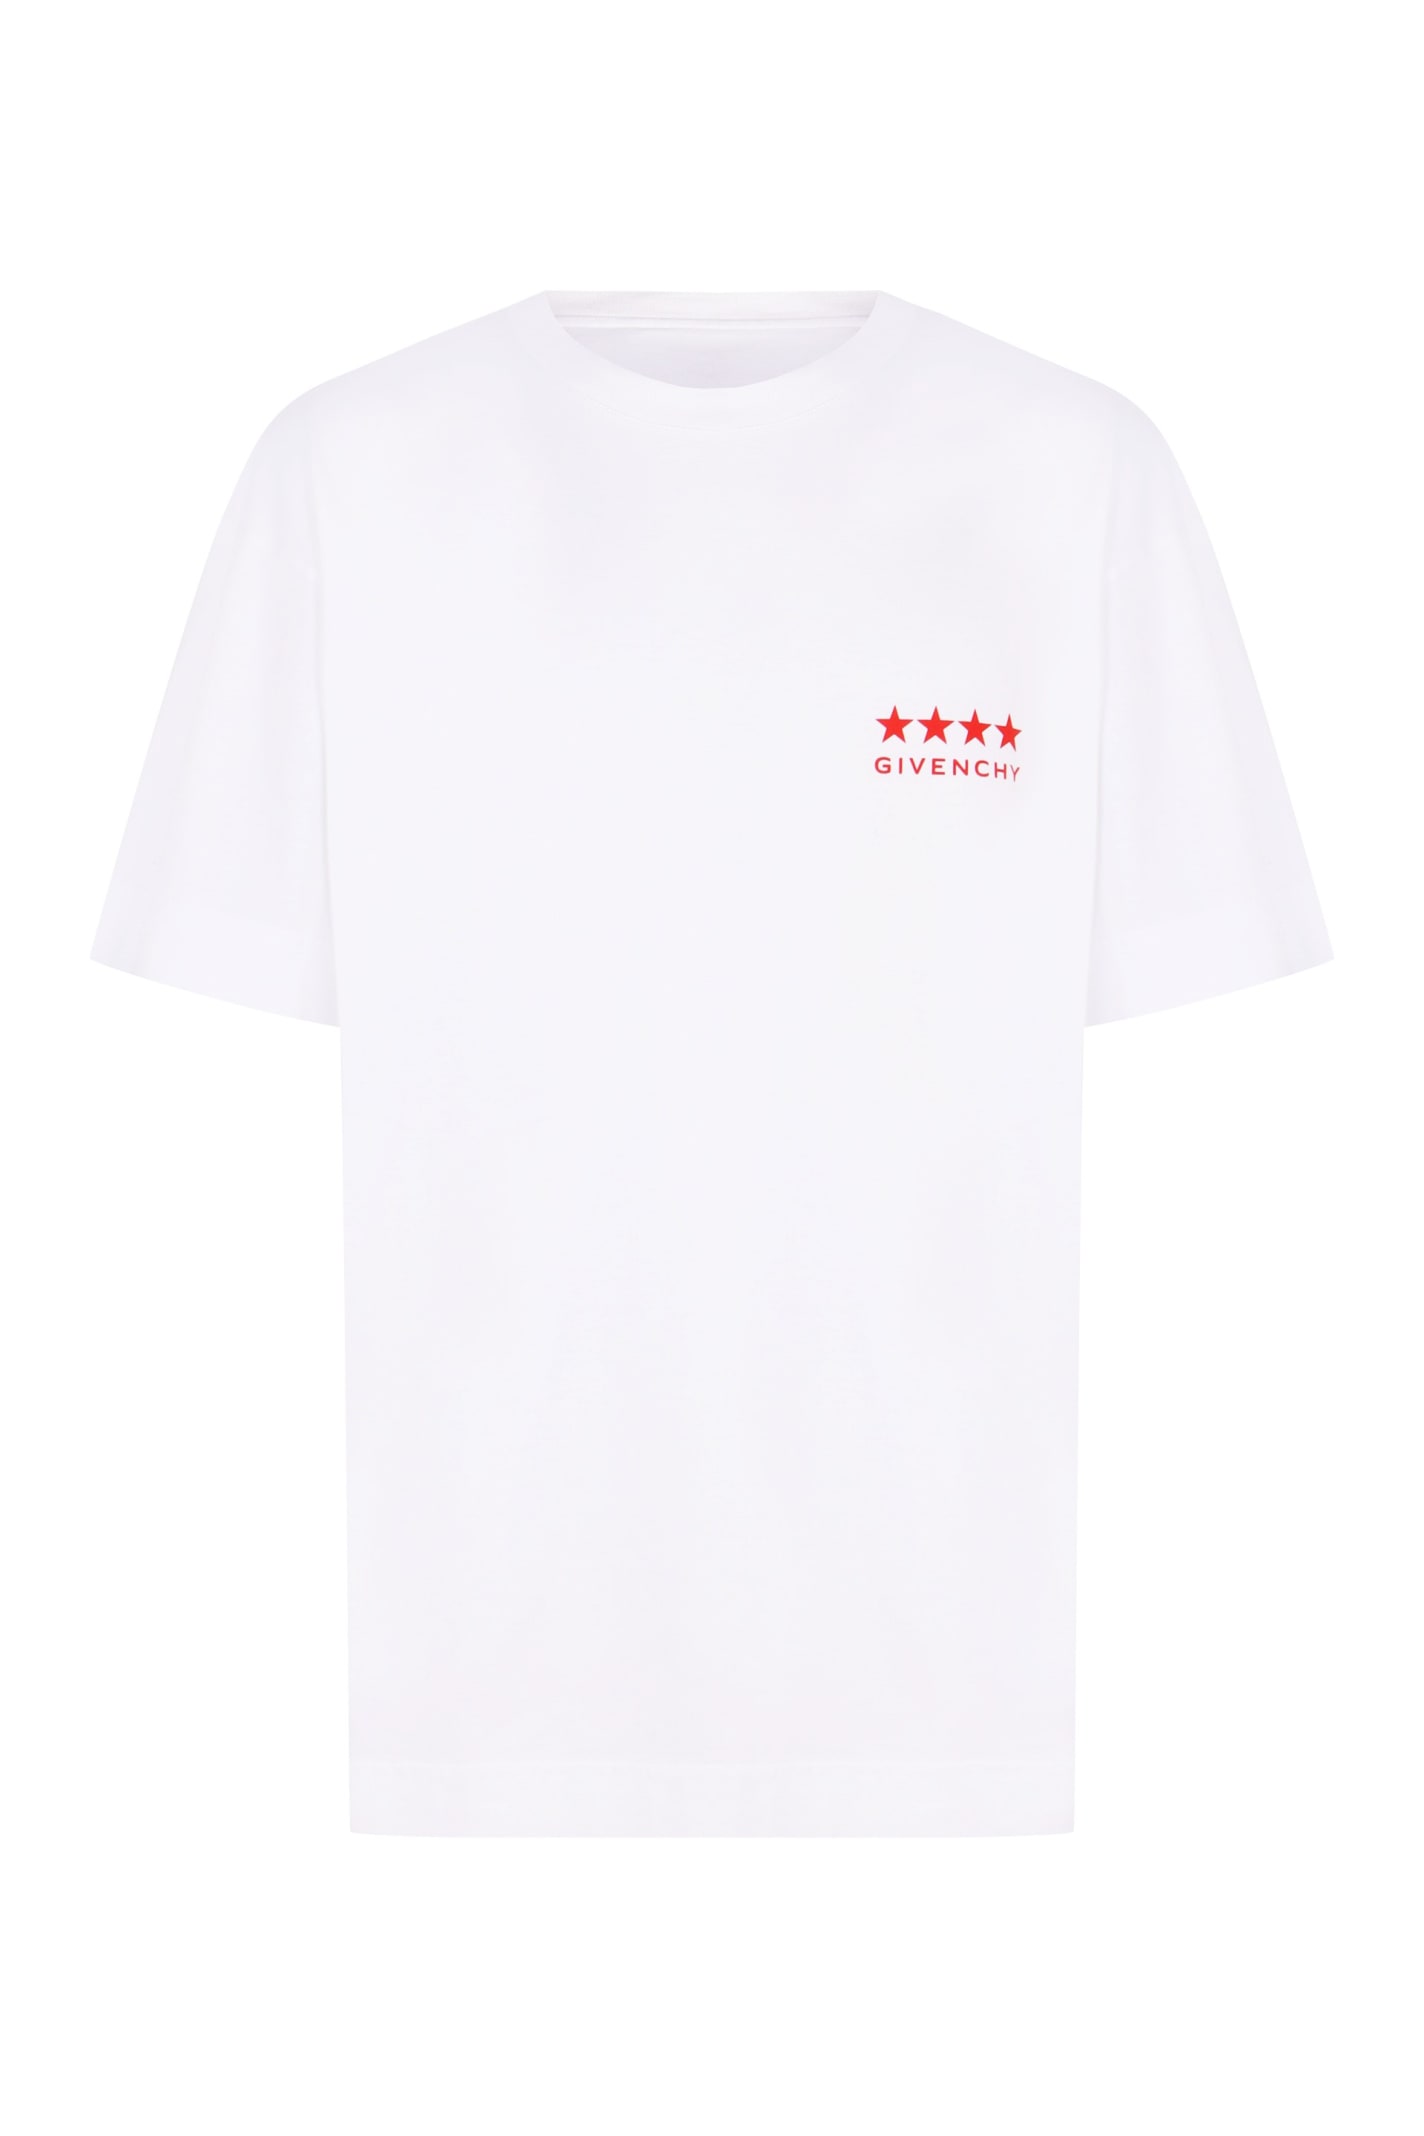 Givenchy Logo Cotton T-shirt In White